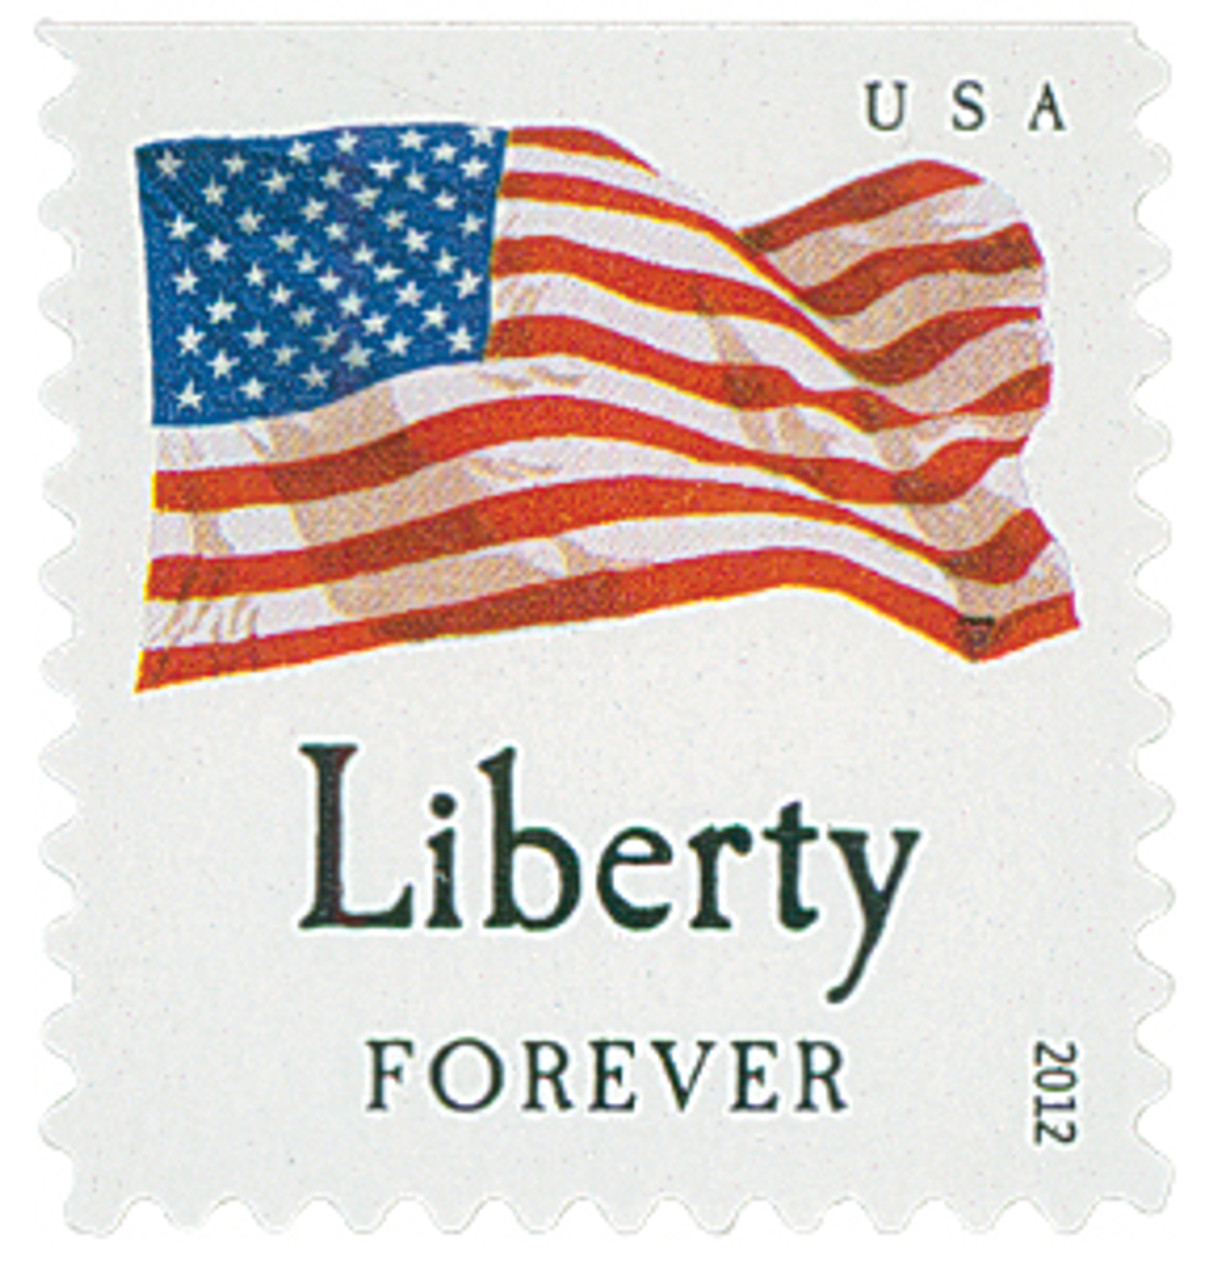 4646 - 2012 First-Class Forever Stamp - Flag and Liberty with Dark Dots  in Star (Sennett Security Products) - Mystic Stamp Company